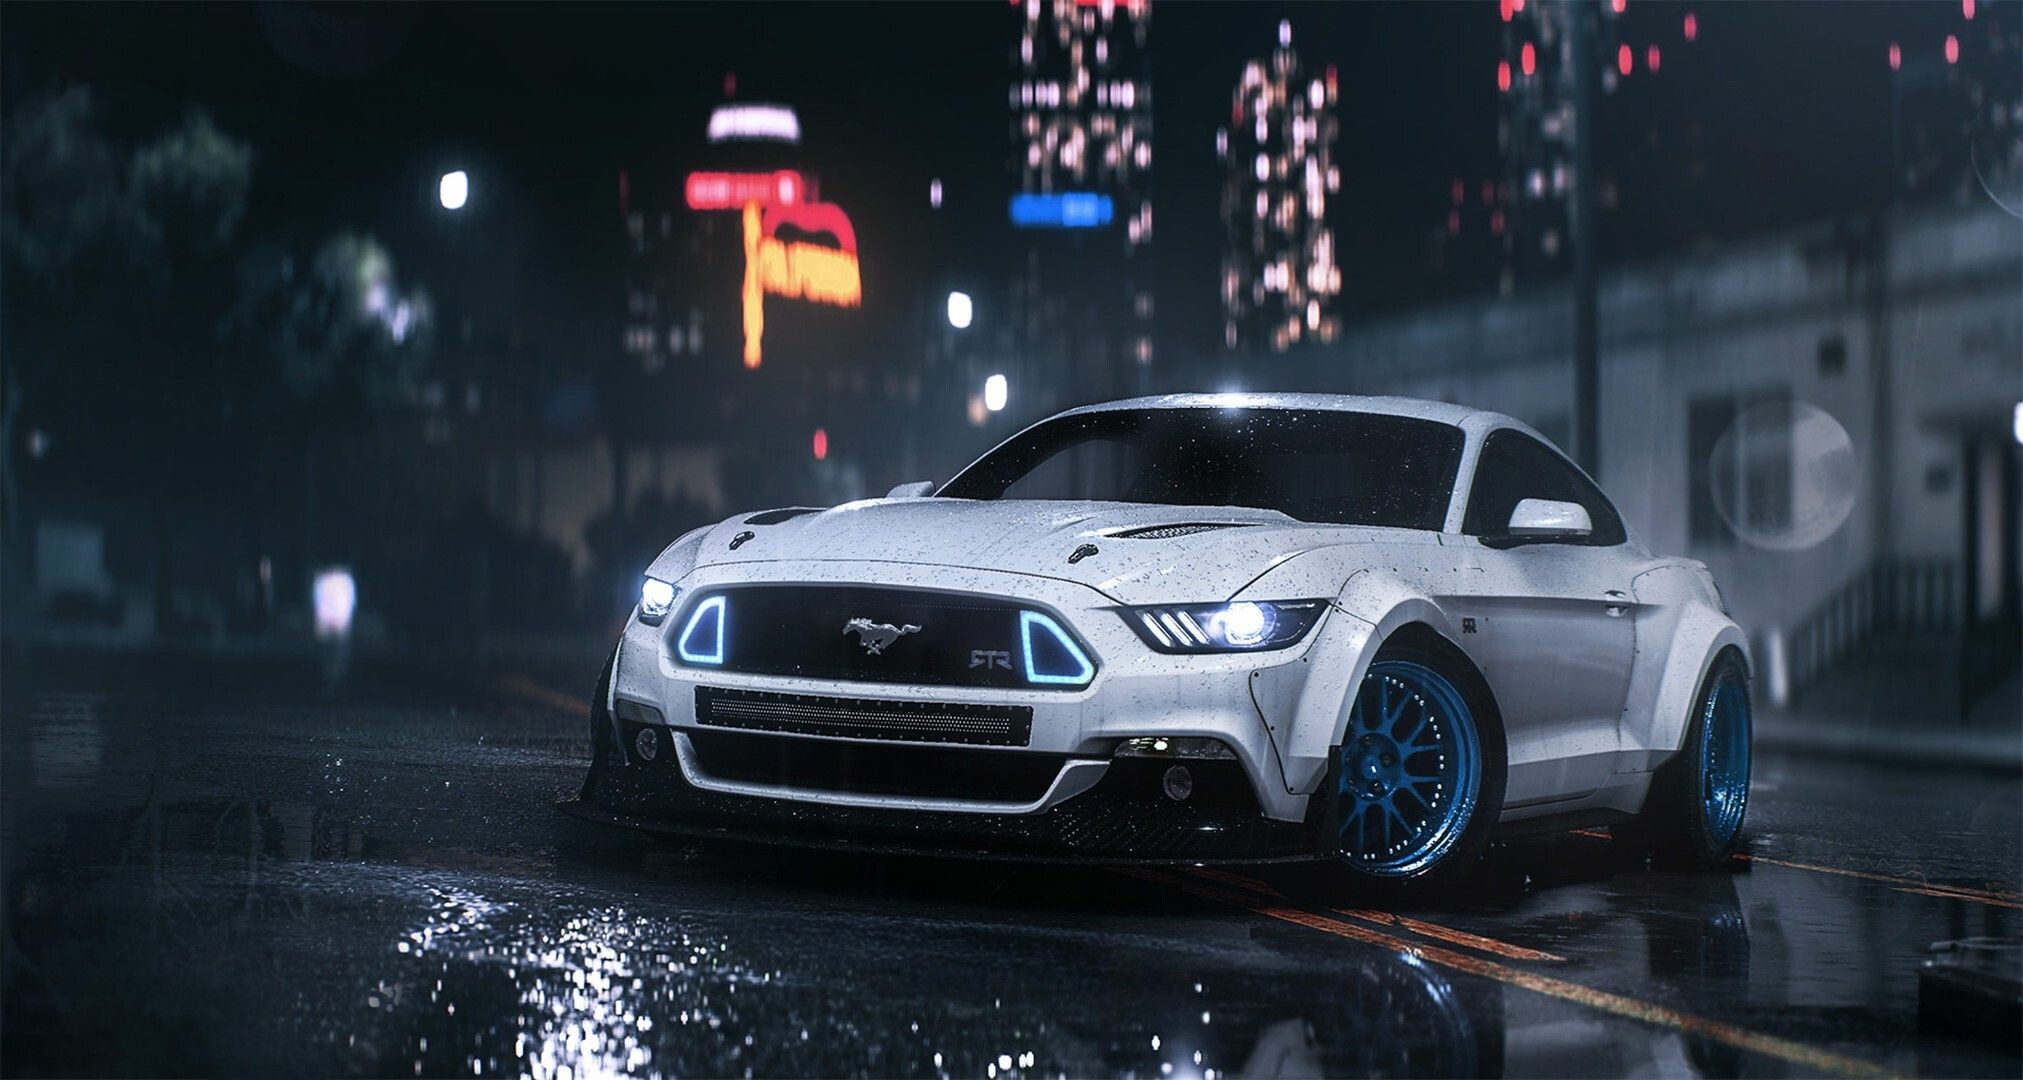 Need For Speed NFS wallpapers HD for desktop backgrounds